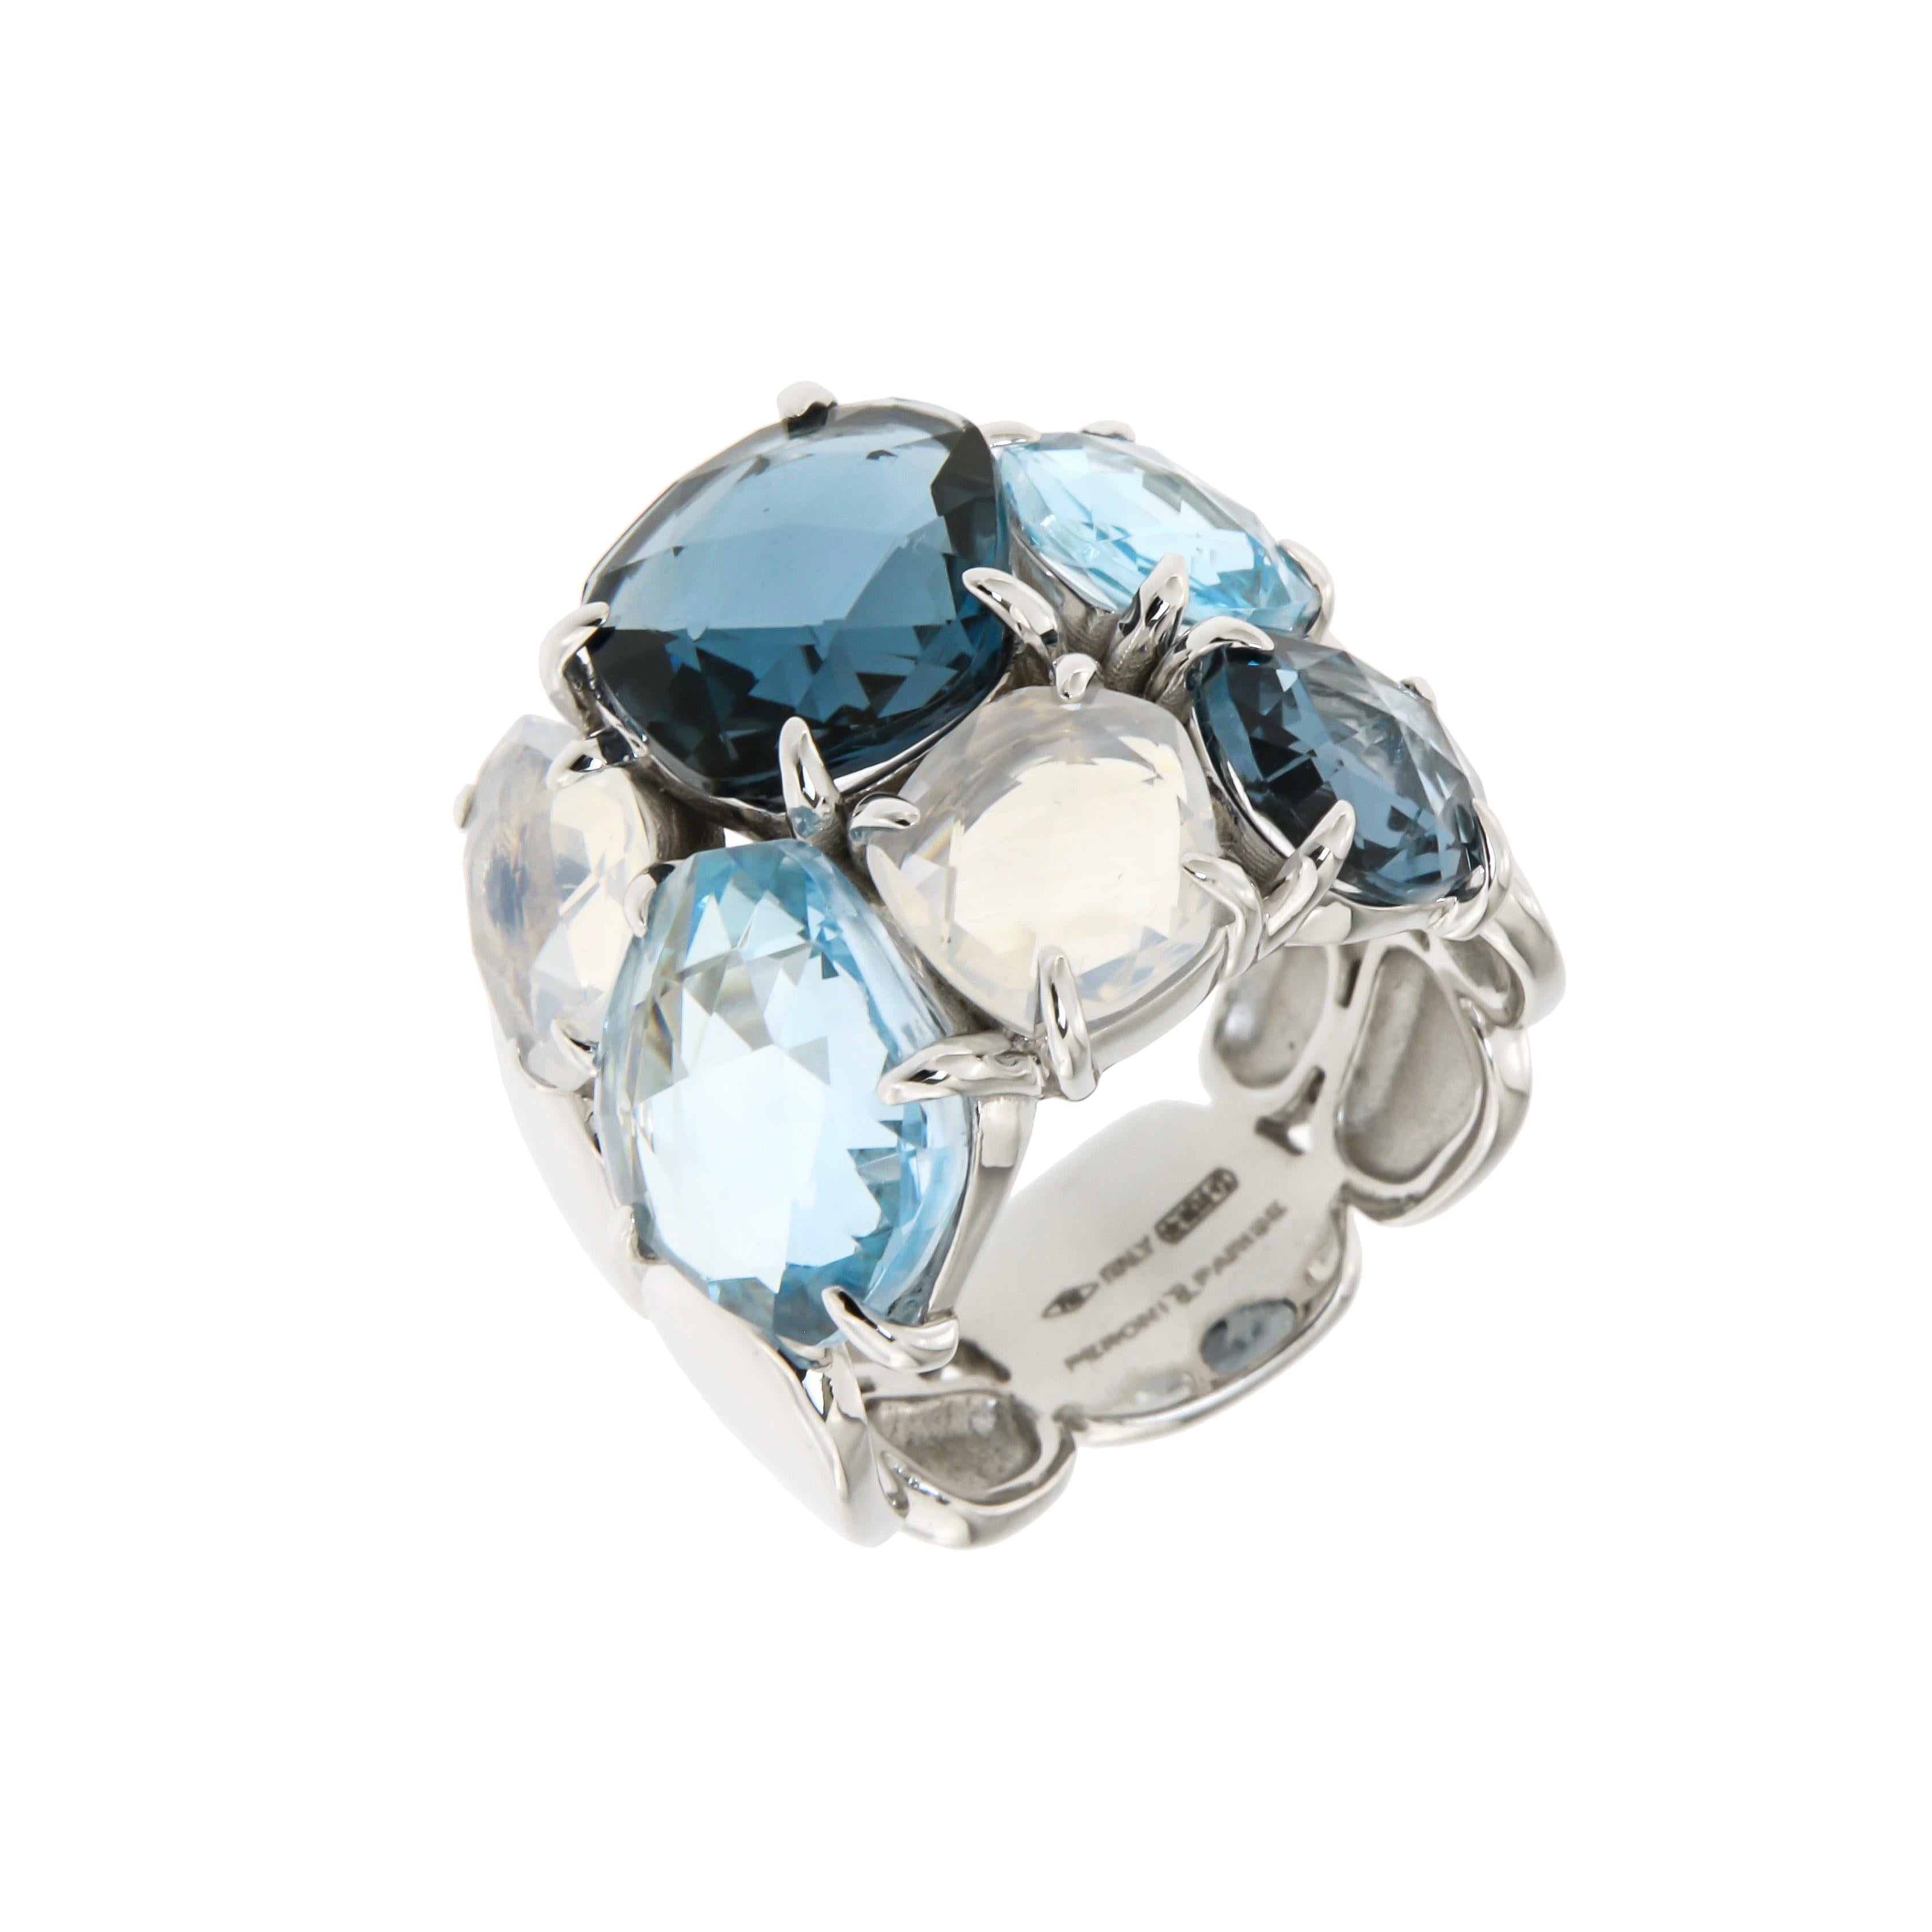 Ring White Gold 18 K
London Blue Topaz 
Sky Blue Topaz
Quartz

Weight 12,4 grams
Size 14

With a heritage of ancient fine Swiss jewelry traditions, NATKINA is a Geneva based jewellery brand, which creates modern jewellery masterpieces suitable for